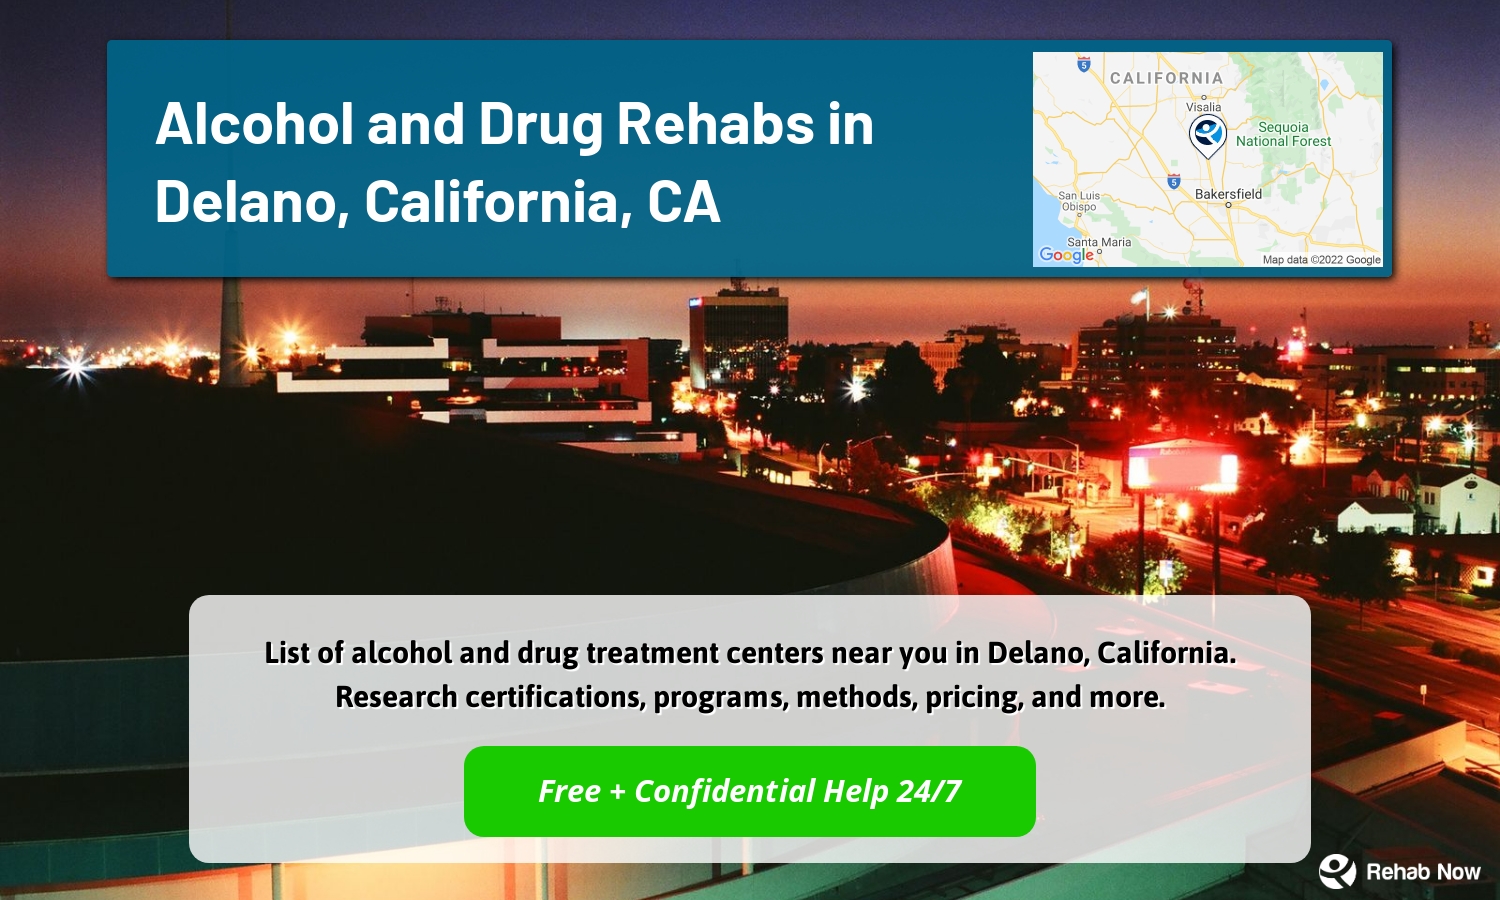 List of alcohol and drug treatment centers near you in Delano, California. Research certifications, programs, methods, pricing, and more.